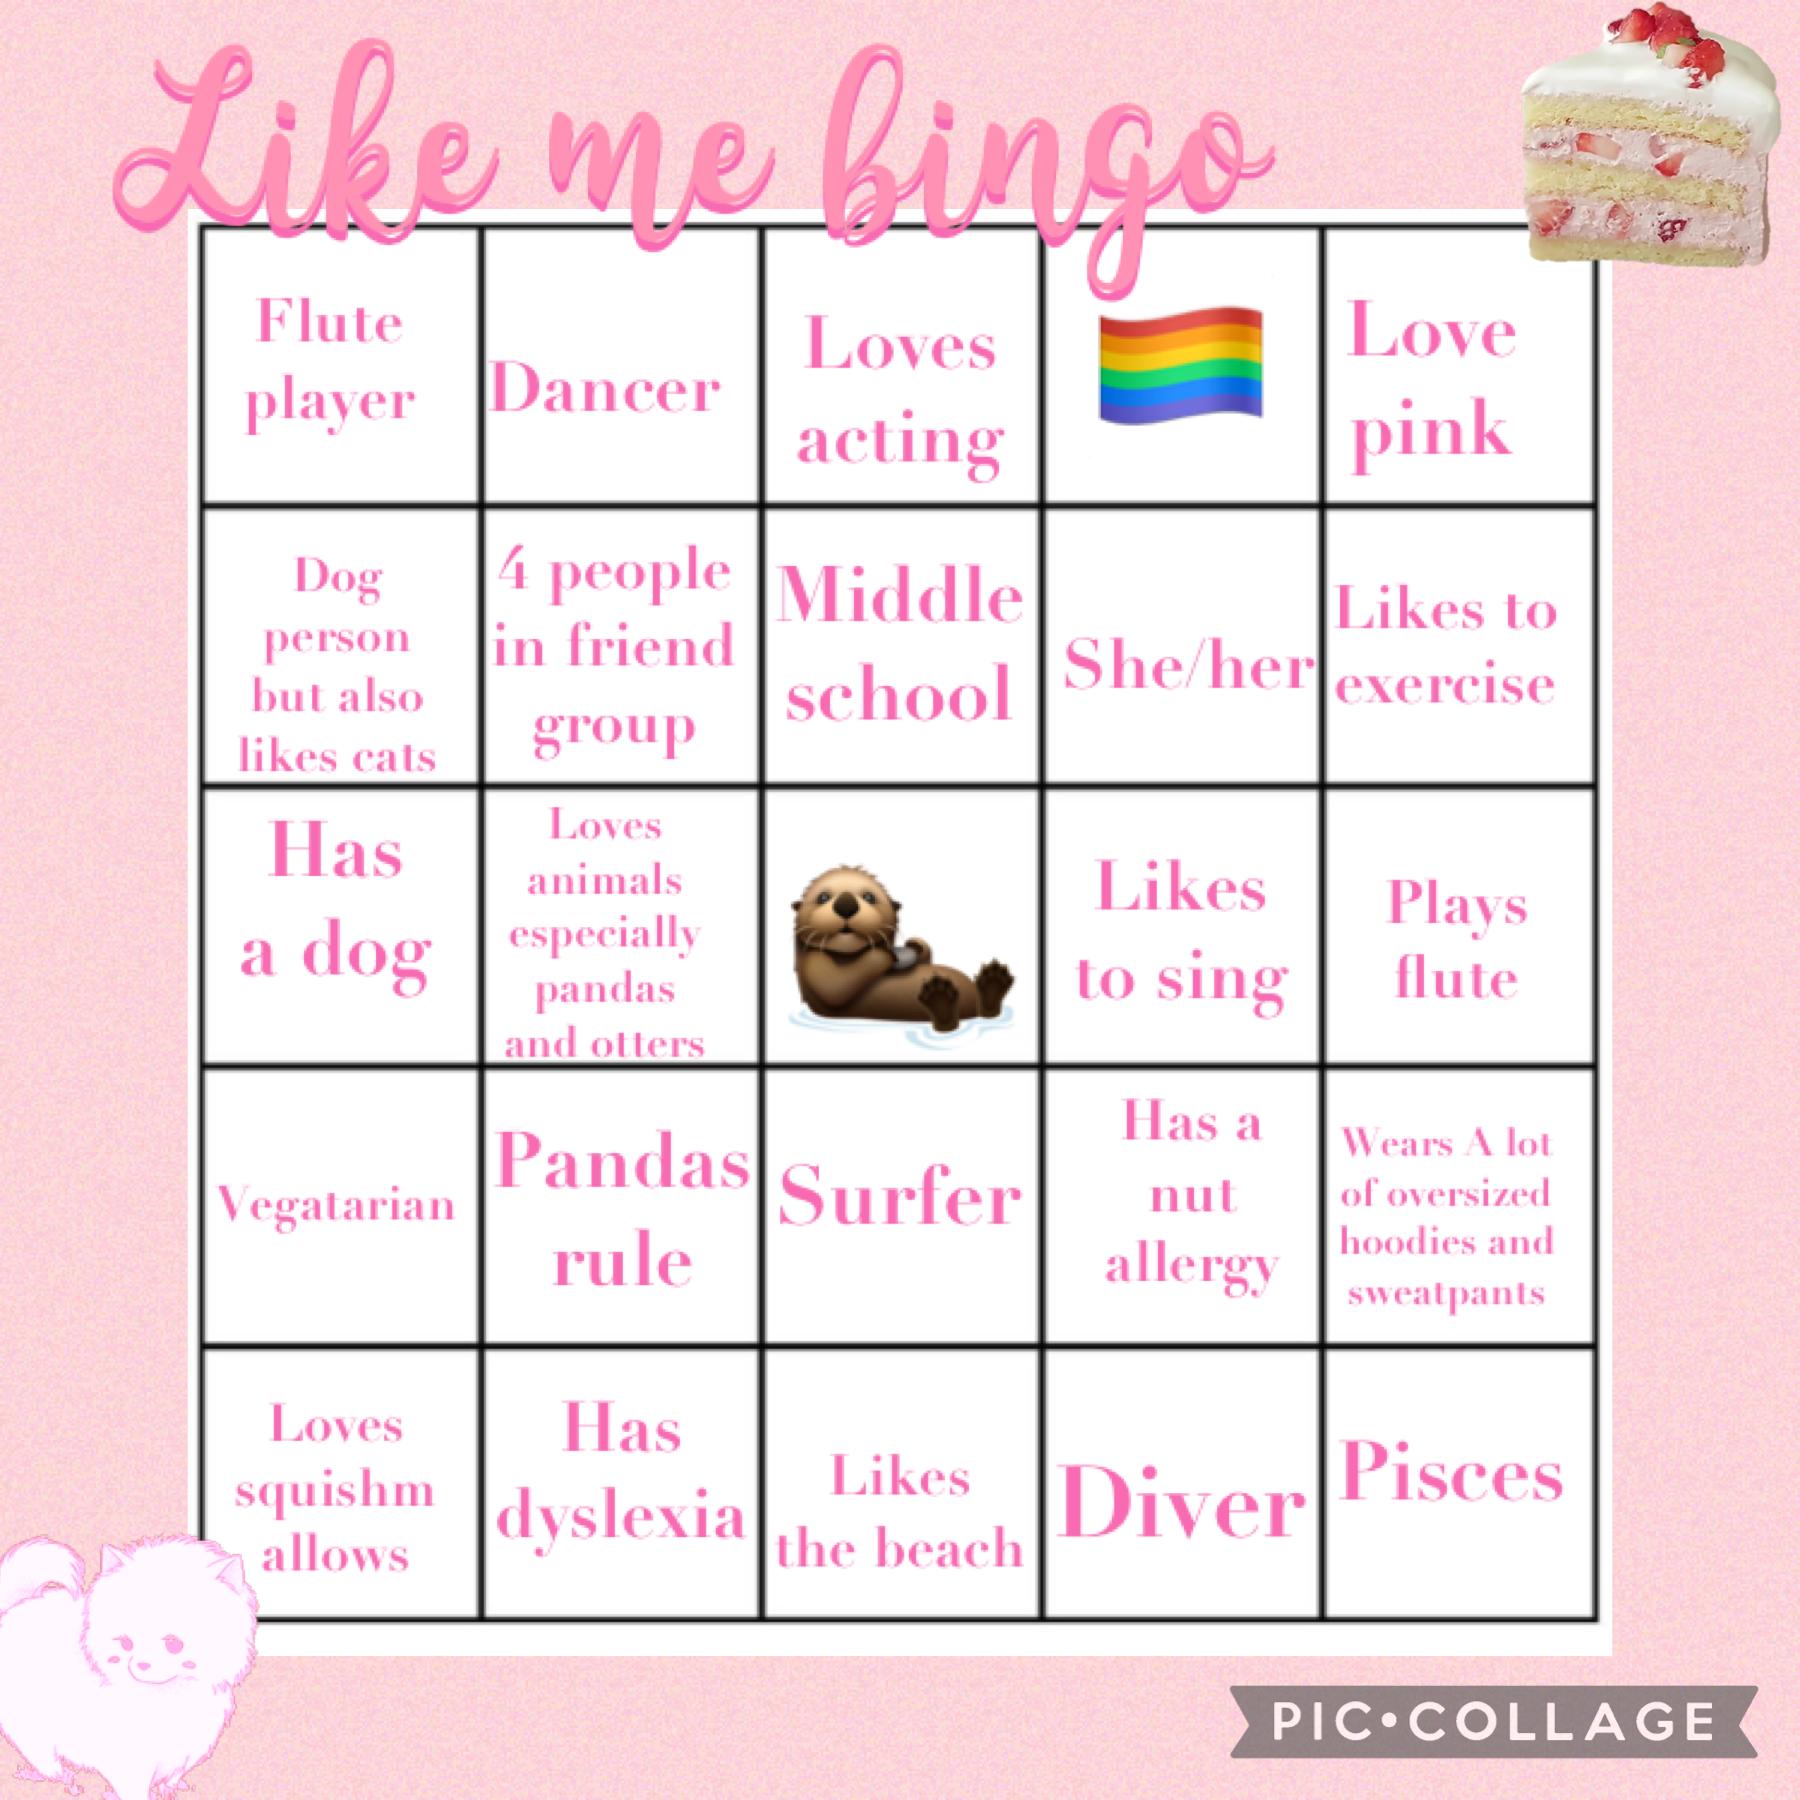 🦢Tap!🦢
Like me bingo! Remix this with what you got!🦢🤍